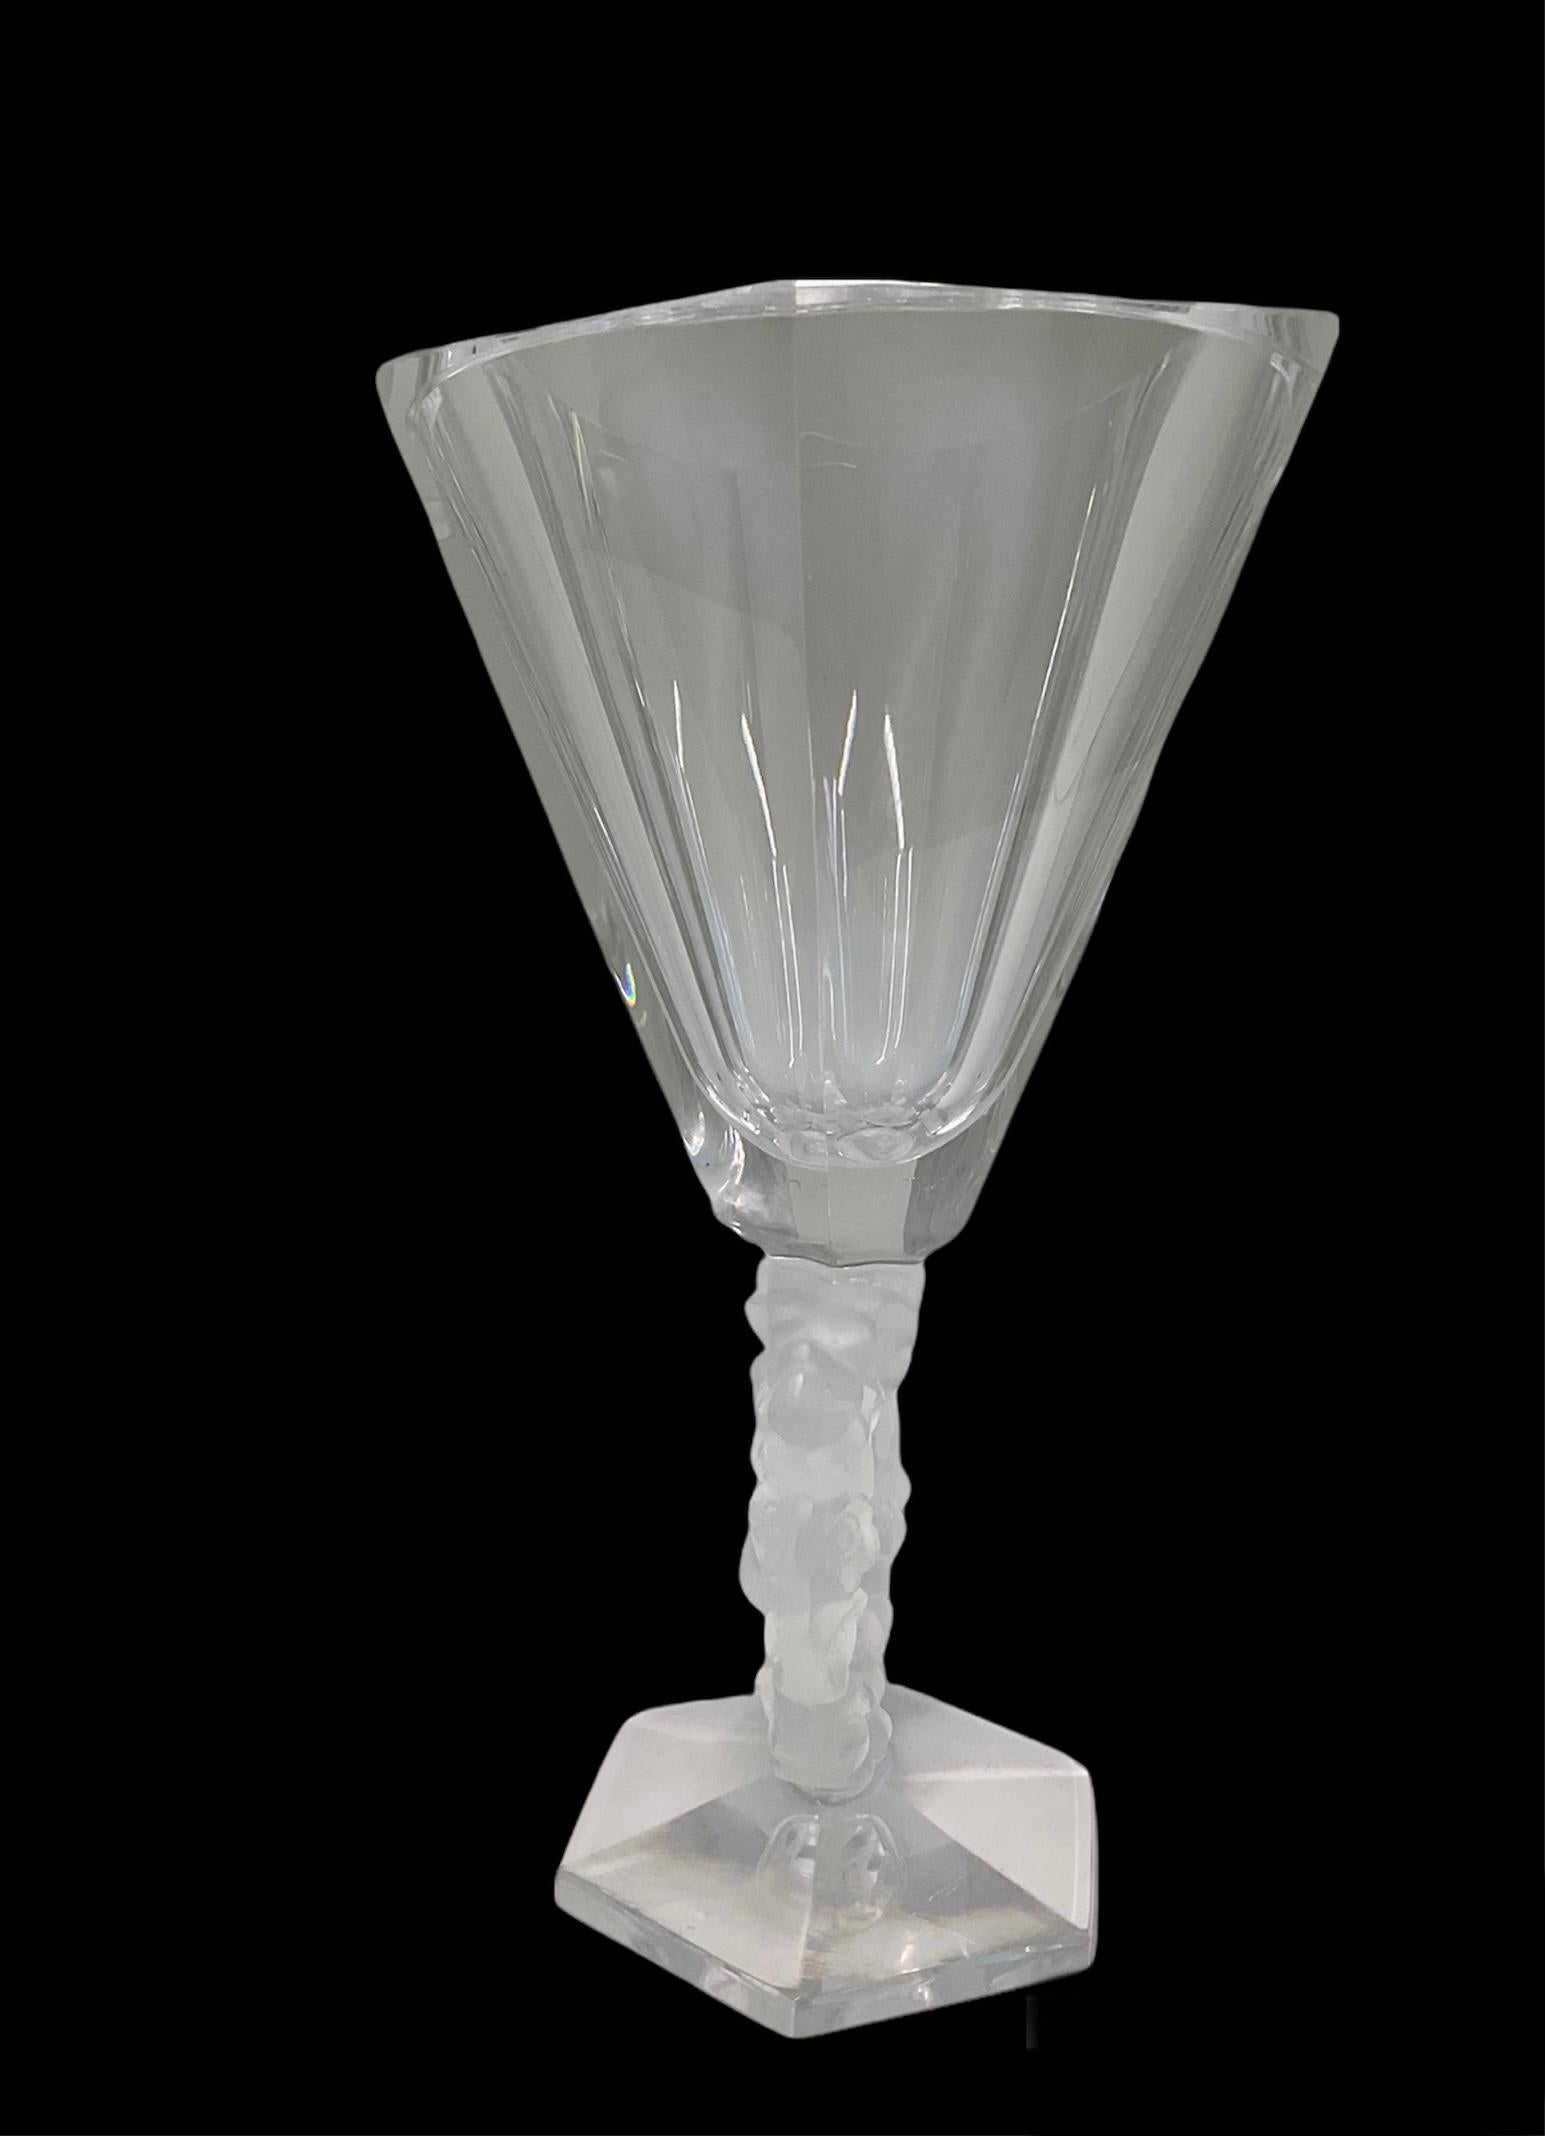 This is a Lalique Crystal Mesange flower vase. It depicts a vase with an hexagonal base followed by a stem shaped as a wreath. The wreath is made of periwinkles flowers decorated in the center by two chickadees birds that appear to be talking and